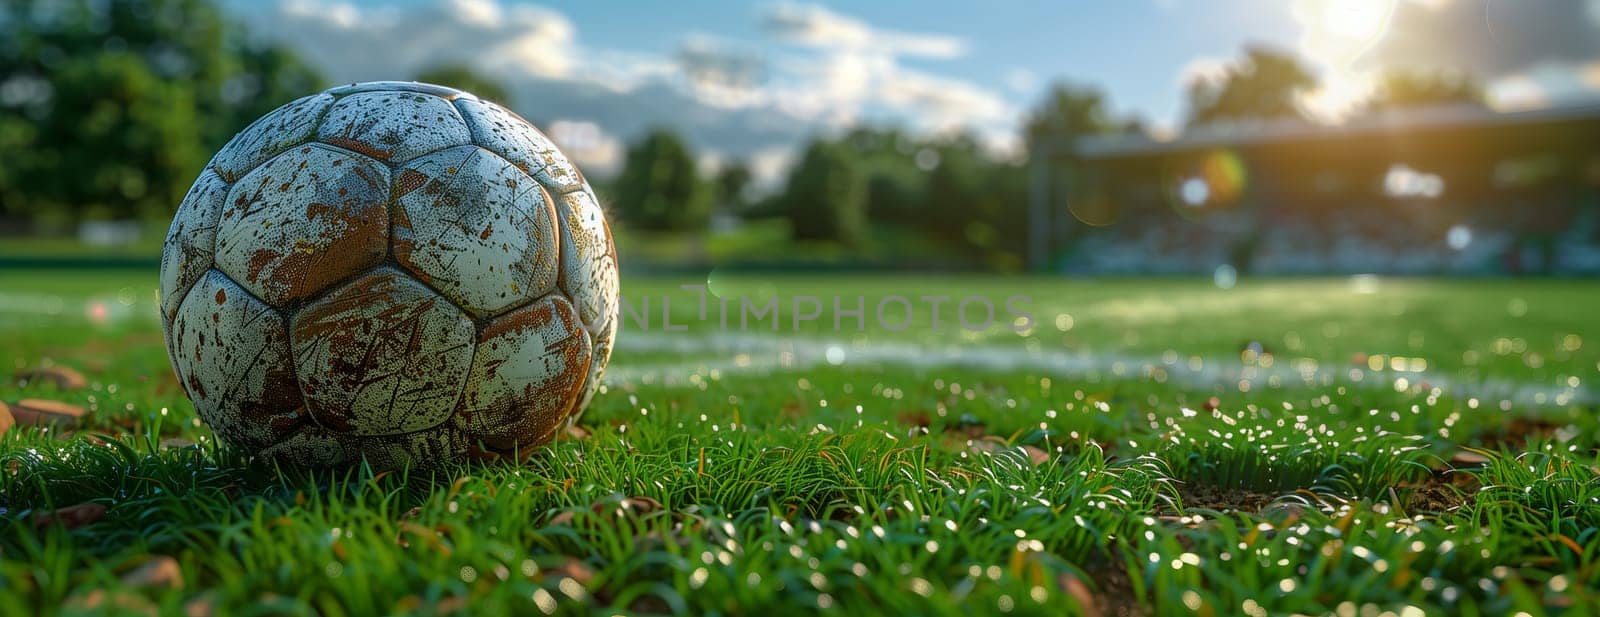 A ball is resting on lush green grass in a natural landscape under a cloudy sky by richwolf